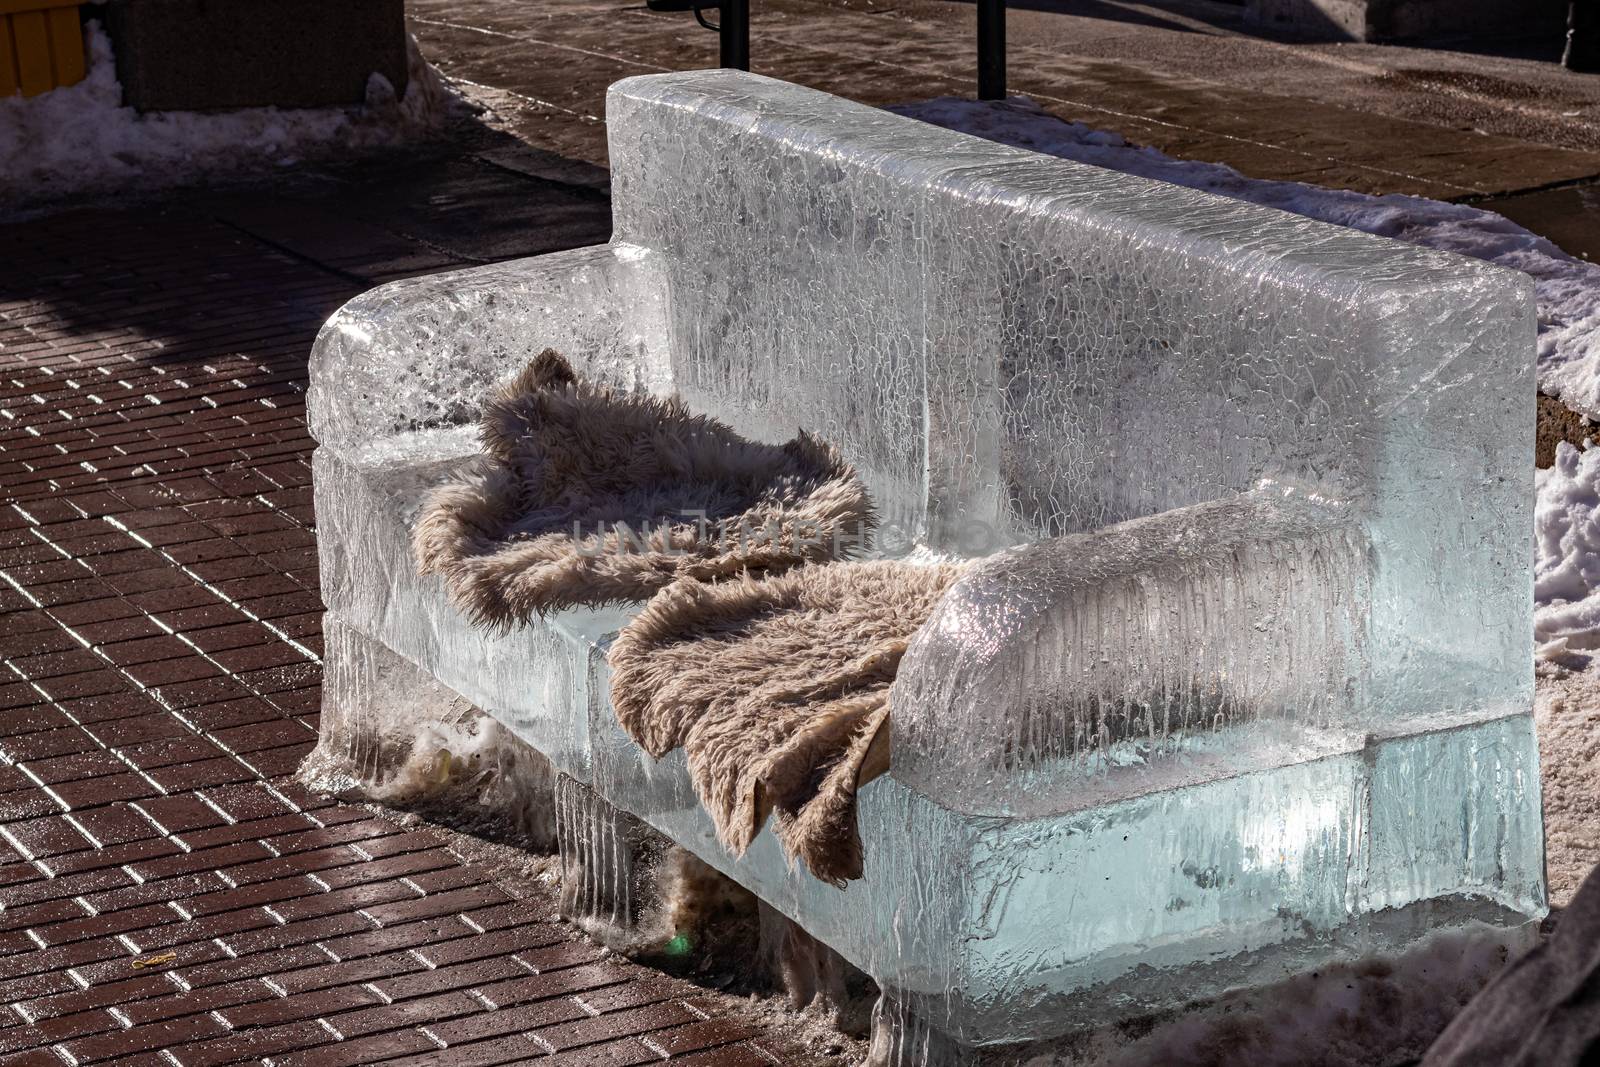 Ice Bench, or Couch, on a Sidewalk by colintemple